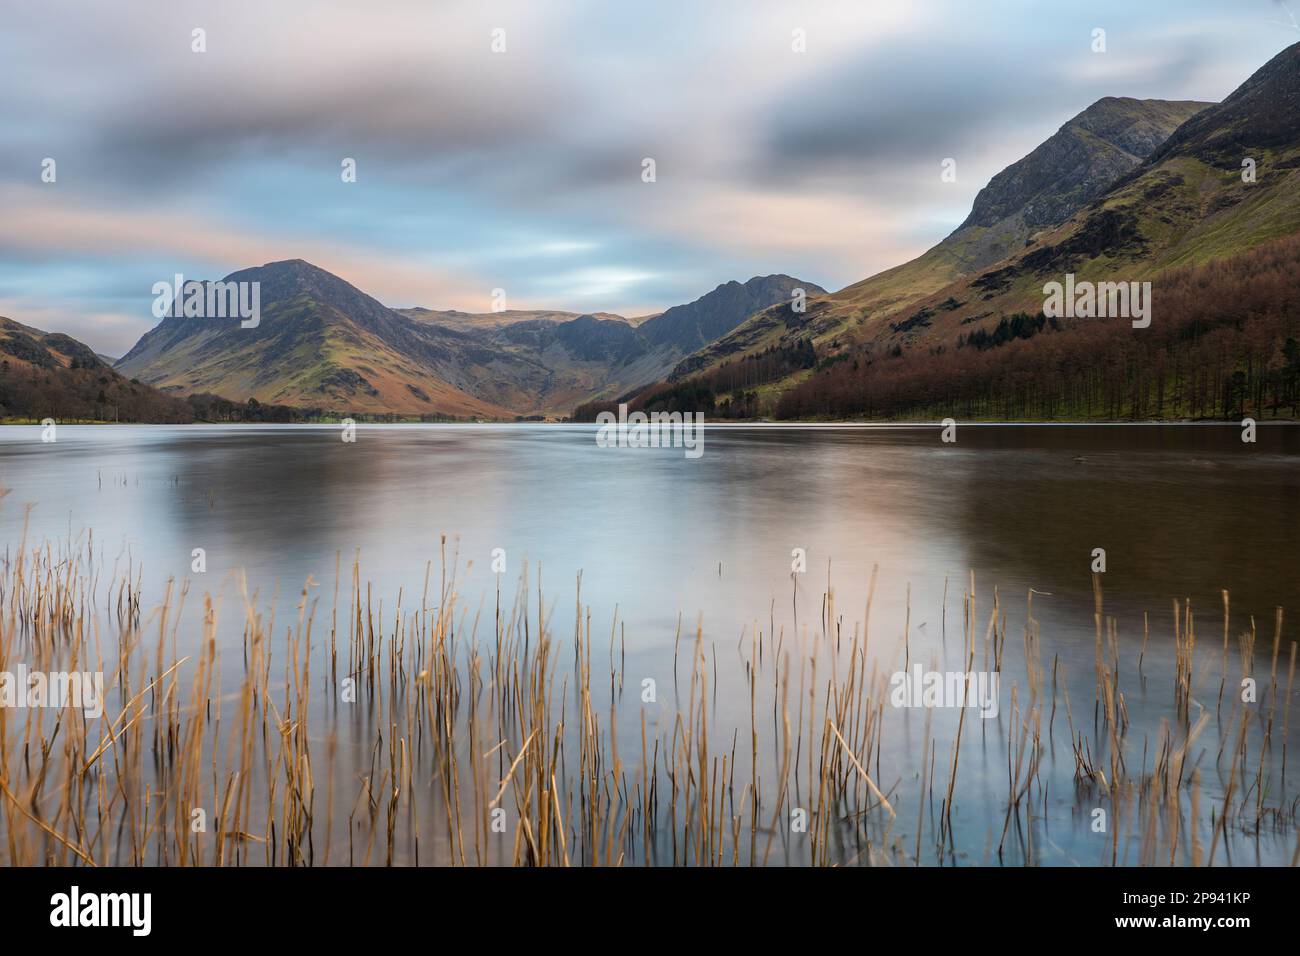 England, Cumbria, Lake District Nationalpark. Buttermere, mit Fleetwith Pike in der Ferne. Stockfoto